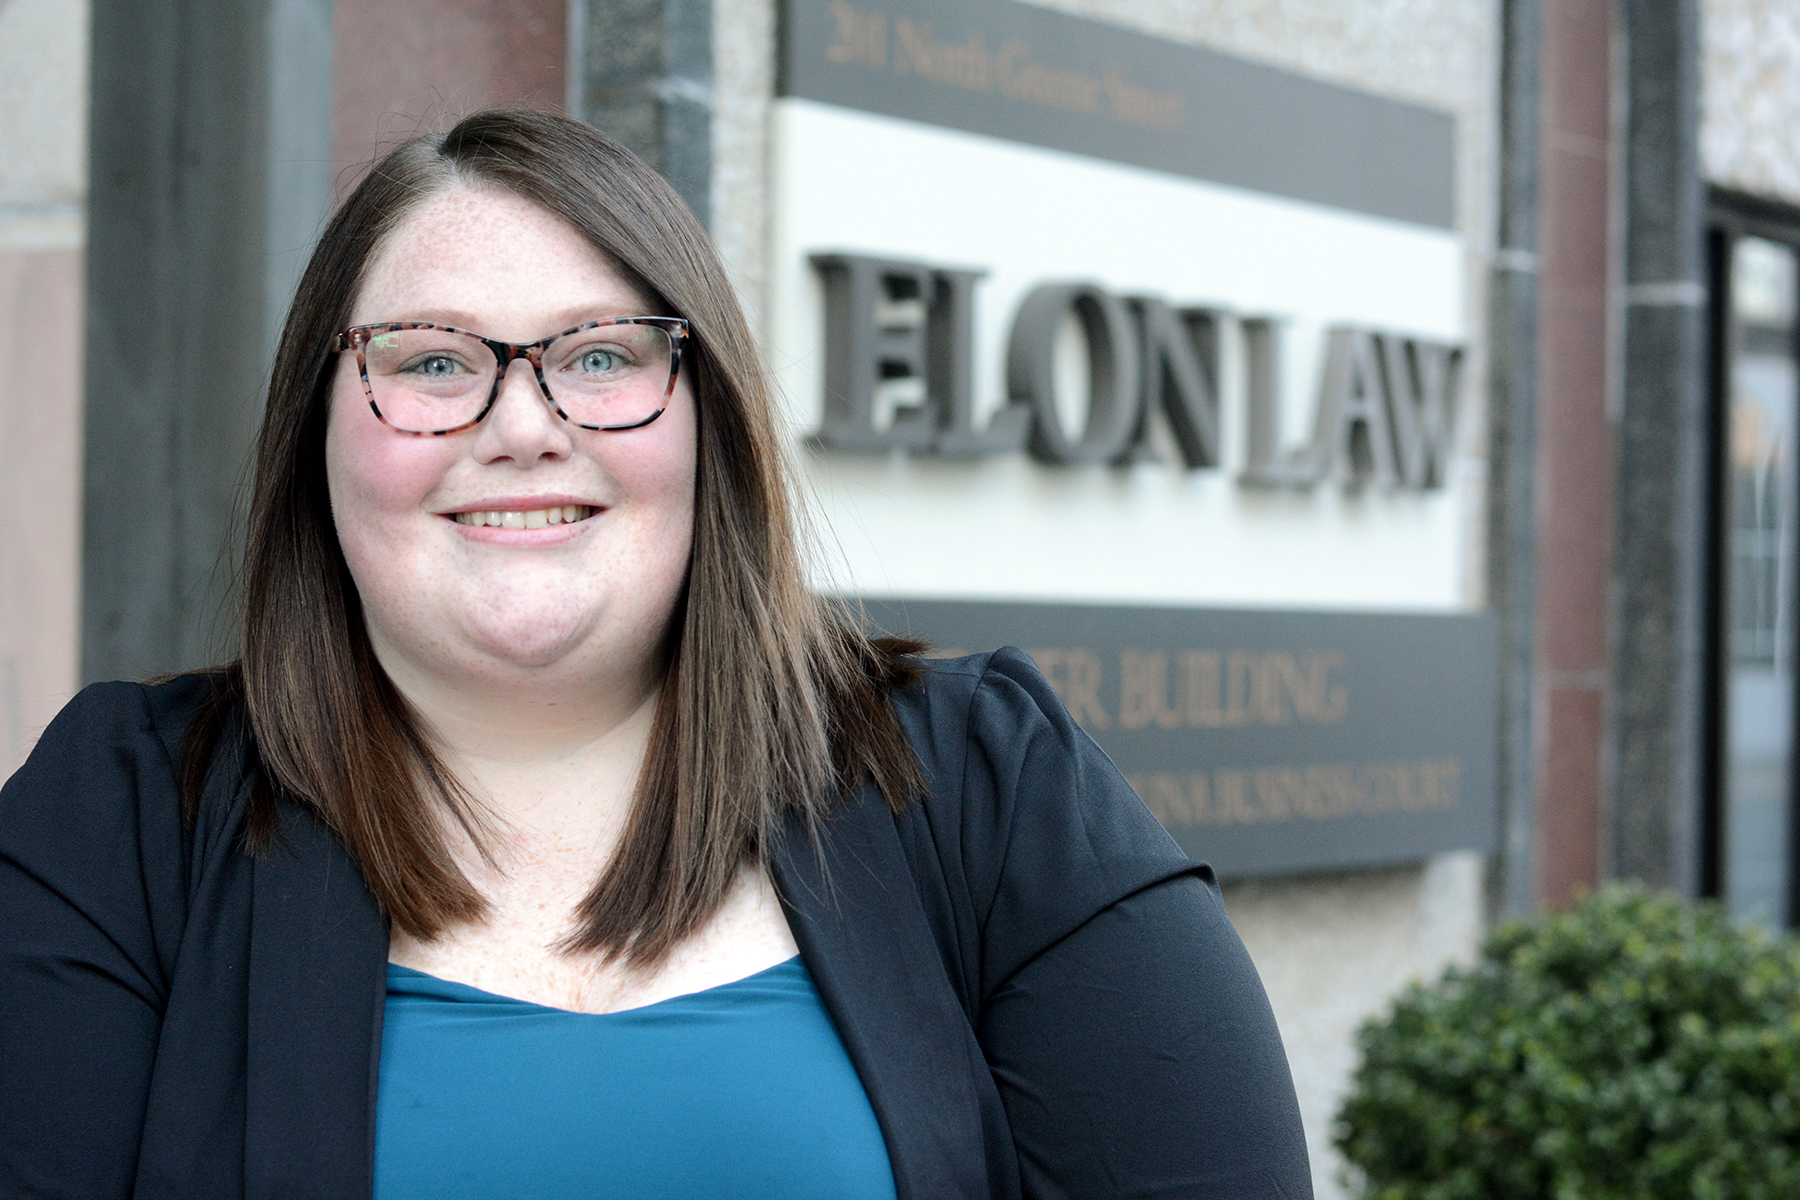 Leadership Fellow produces manual to juvenile justice process | Right now at Elon